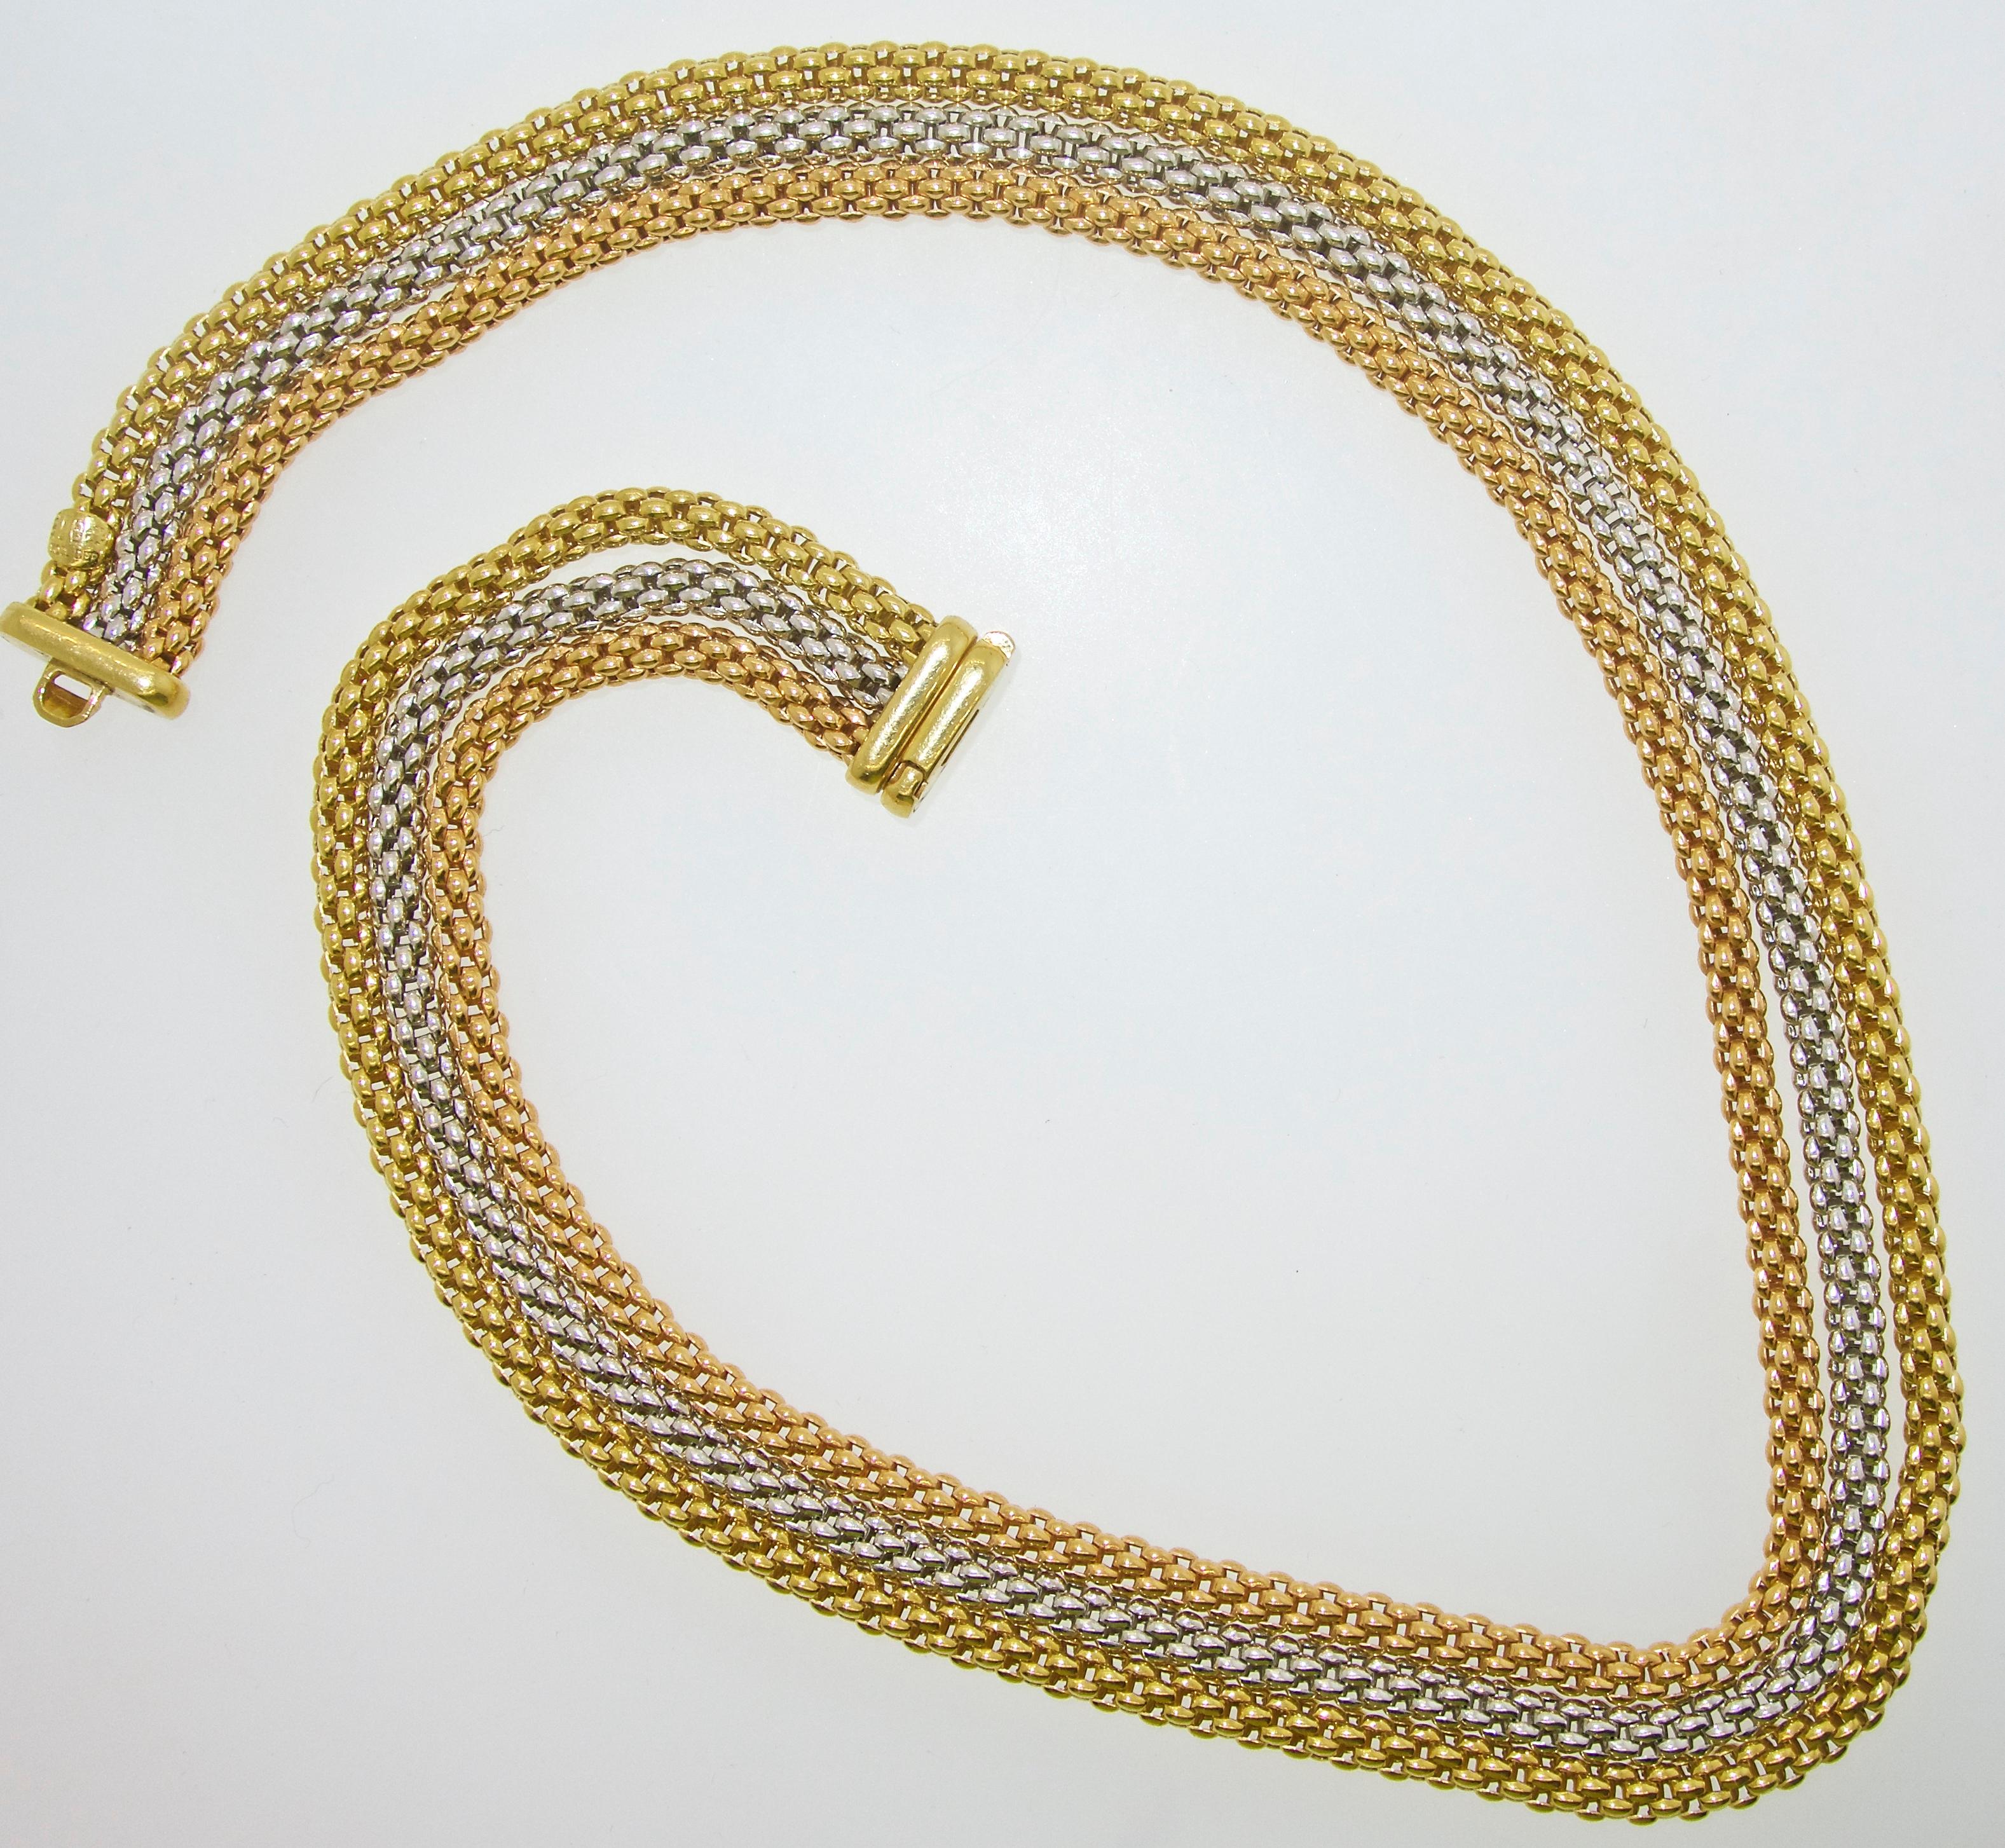 18K gold necklace with three different colors of gold.  The unusual hand made link of three strands nests perfectly on the neck.  17 inches long and weighing 69.92 grams.  Fope is a fine Italian designer known world wide for their innovative